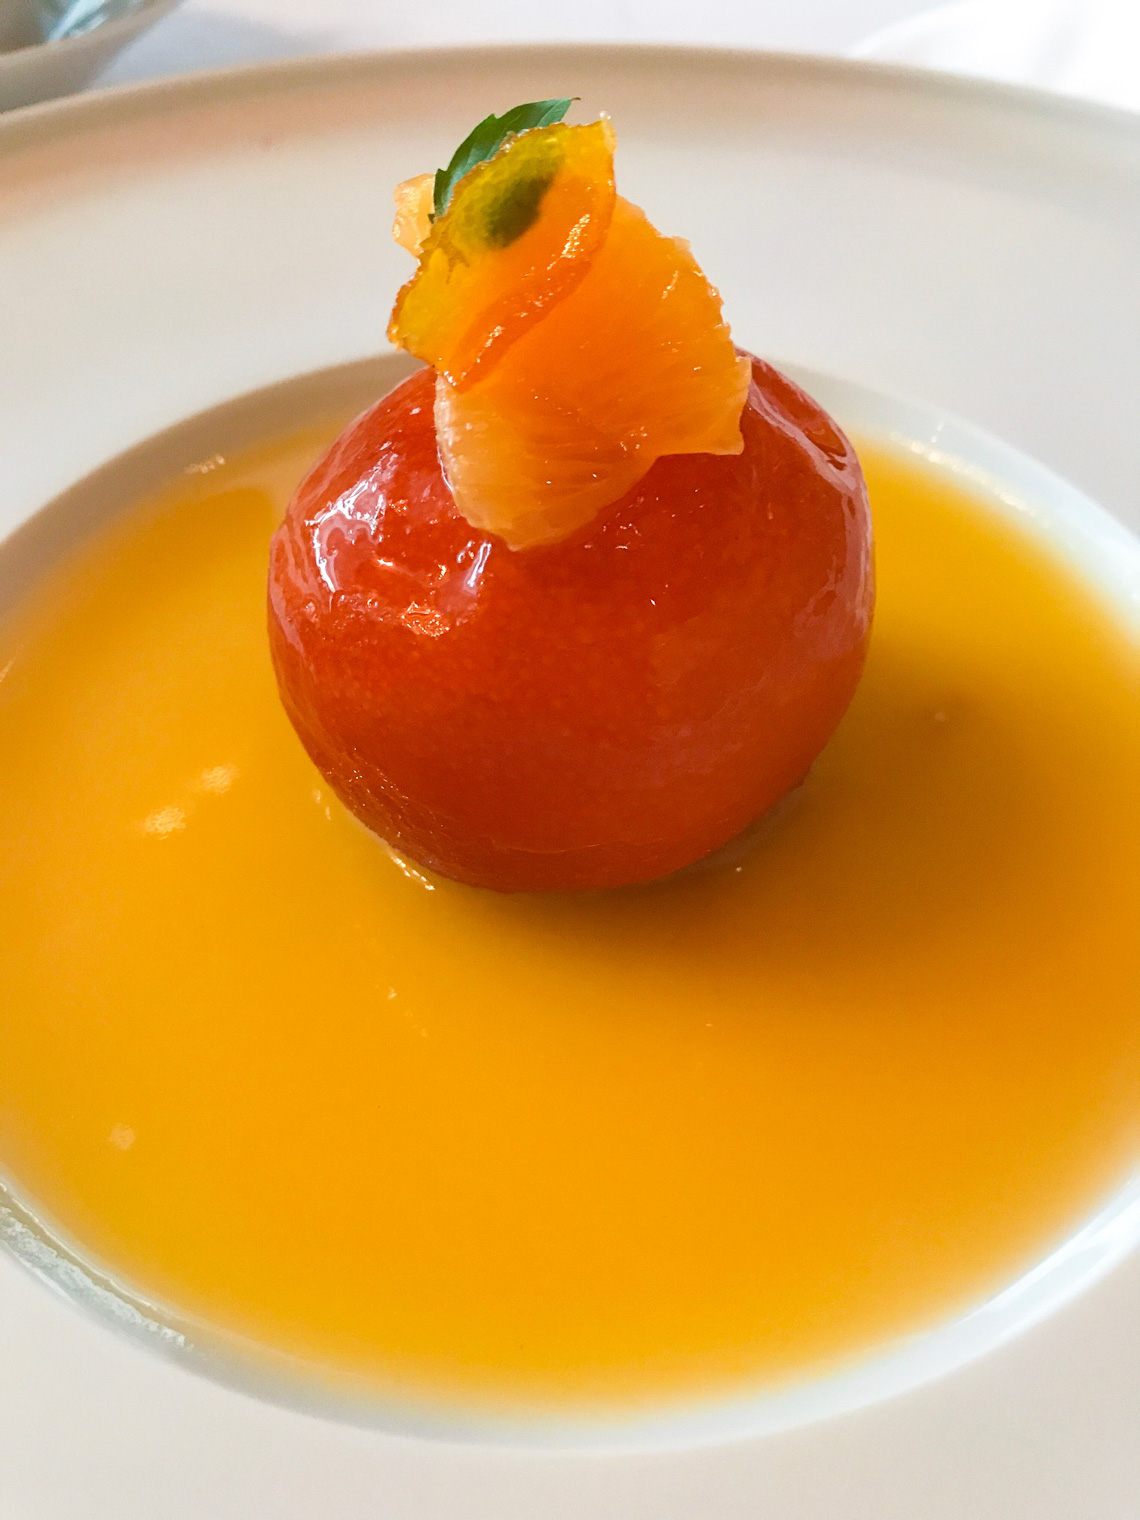 Clementine pudding at French restaurant Les Amis in Singapore